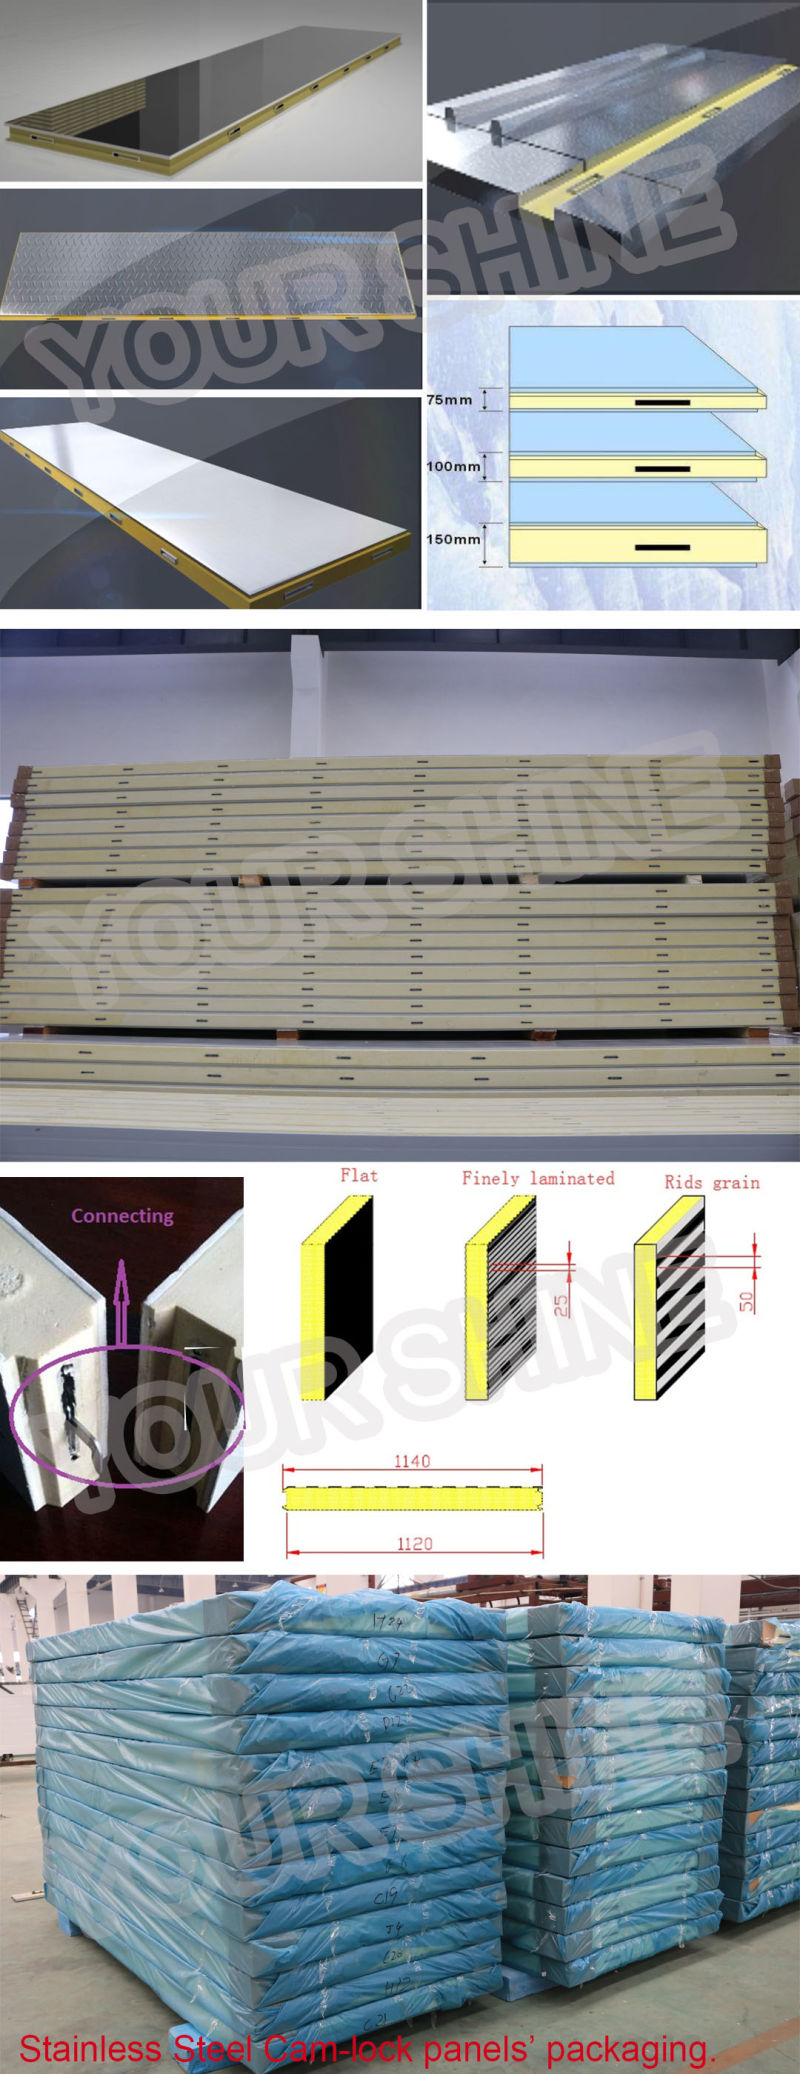 Fire Rated/ Fire Self Extinguishing Type Sandwich Panels + 0086 18217460170 Dubai FM Approved Panels/ Dcl Approved Panels B-2 PU